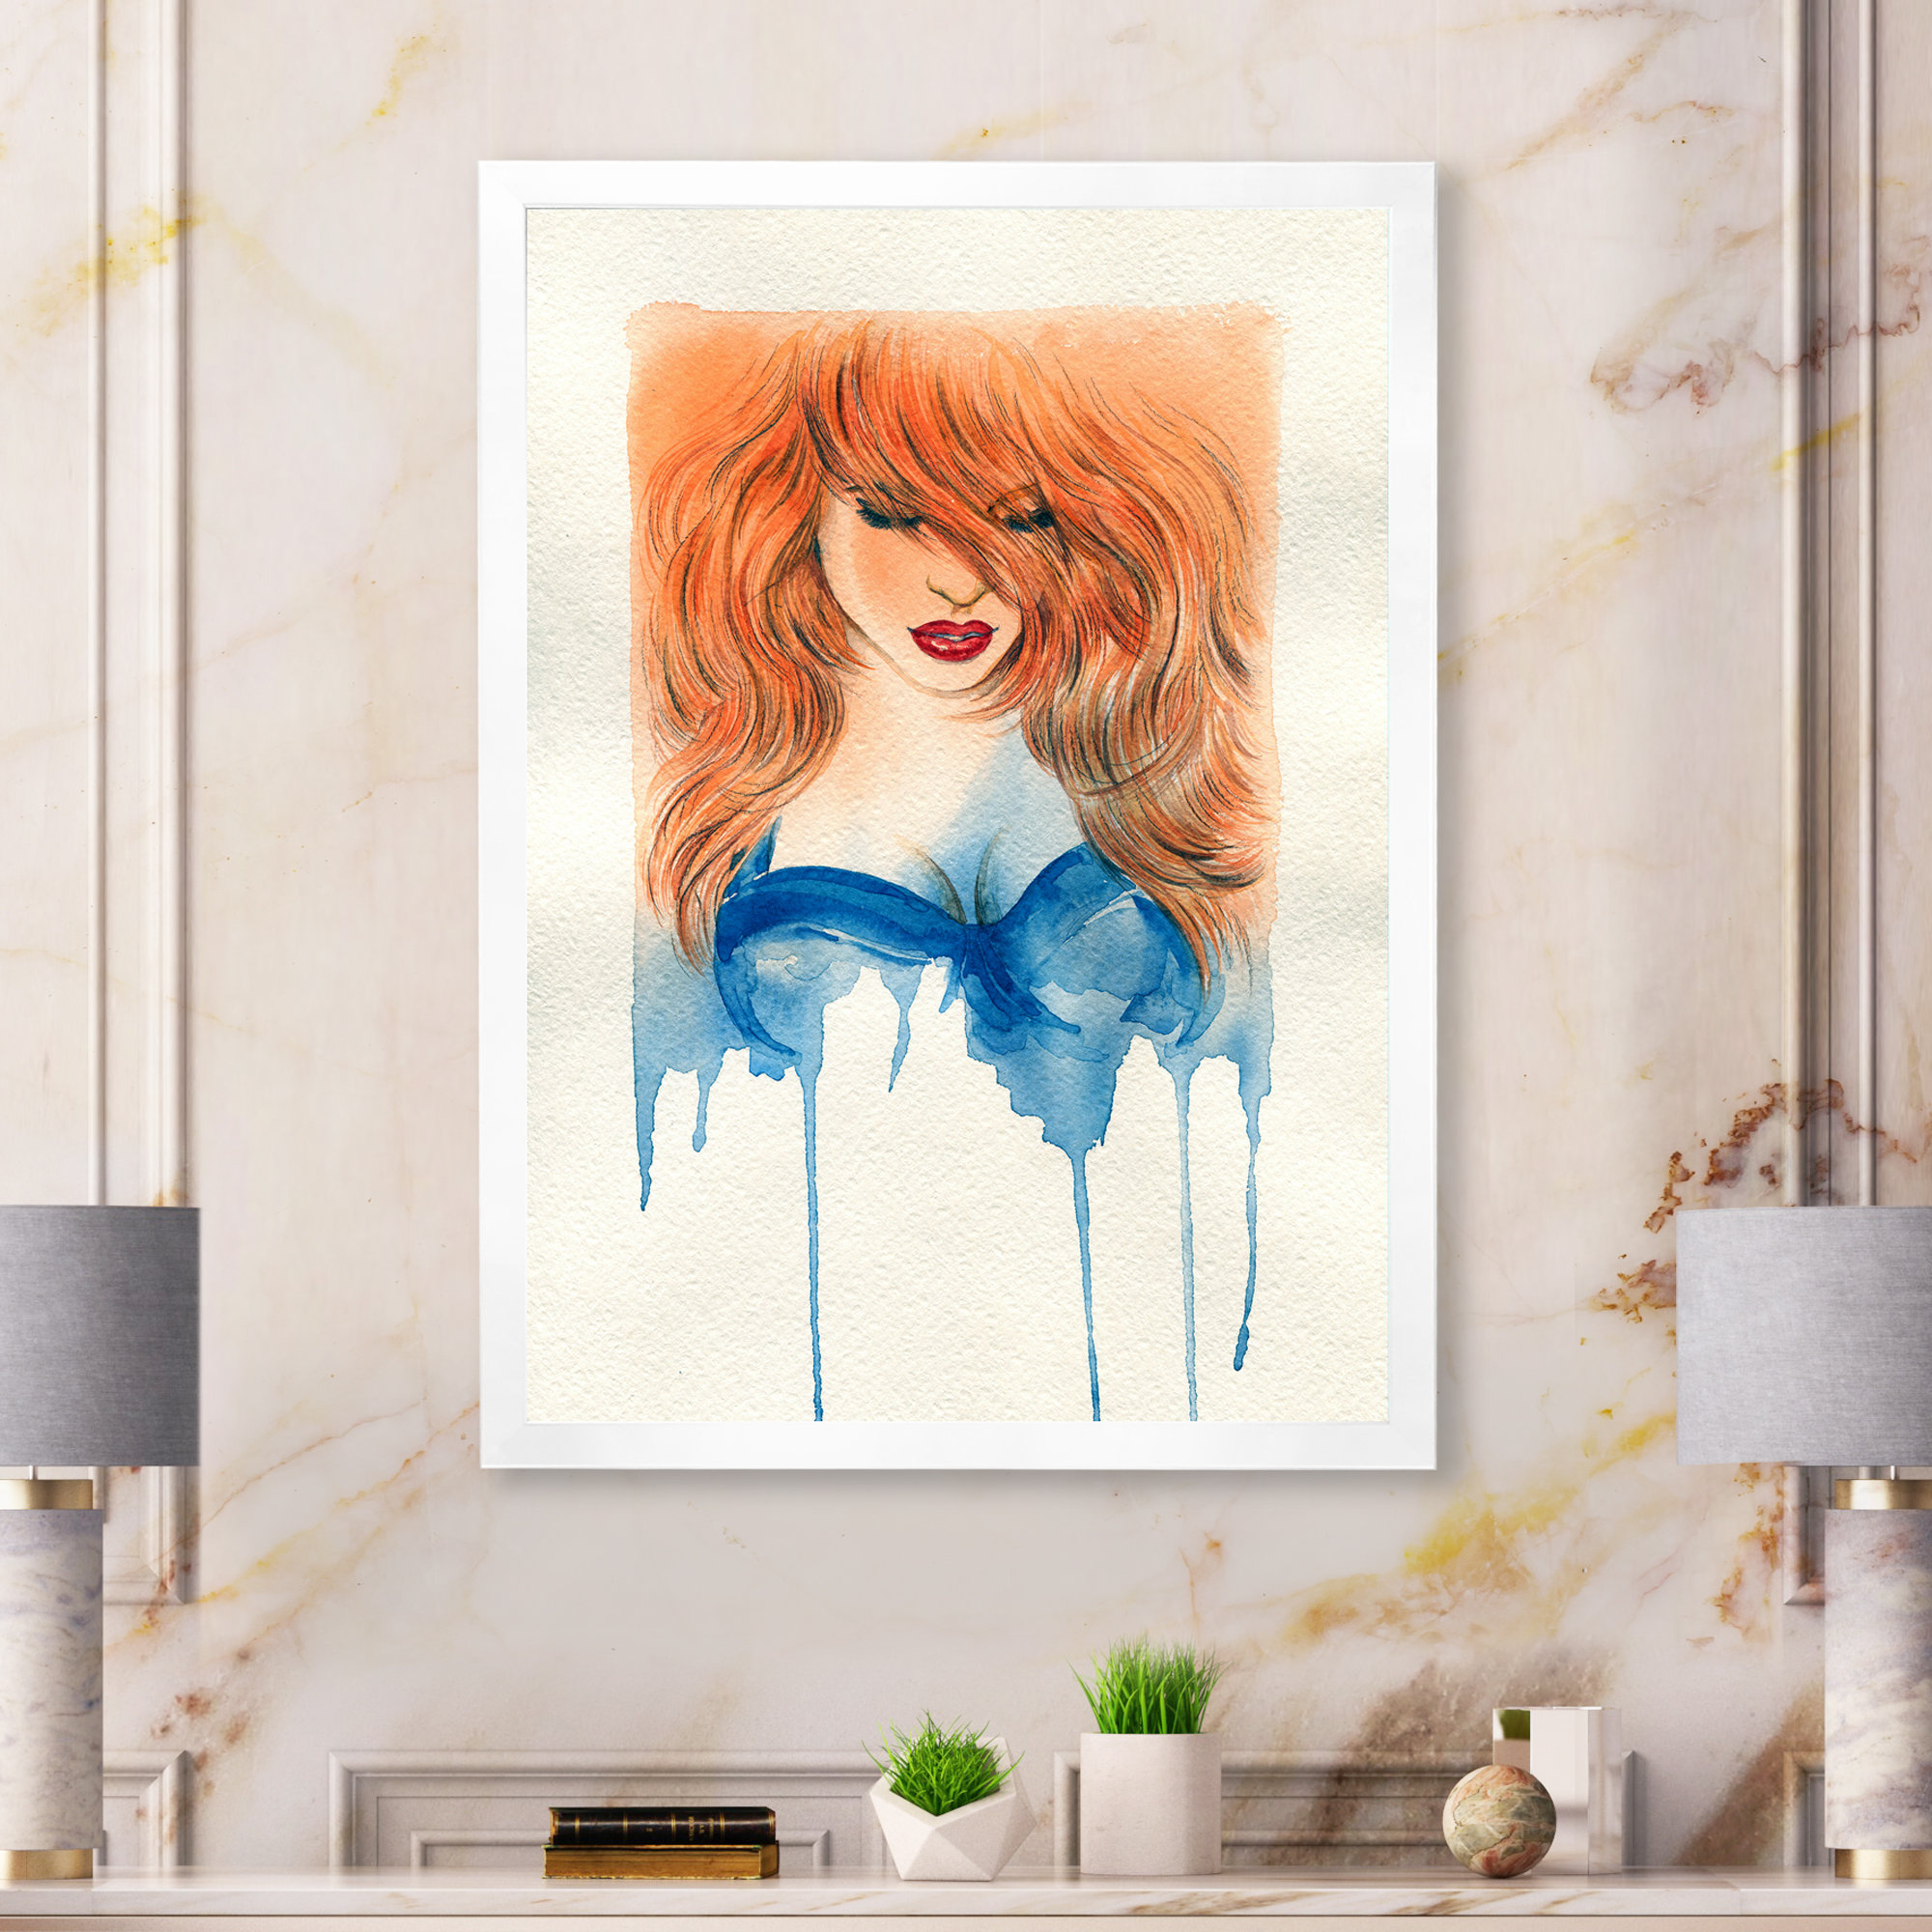 Beautiful Sexy Woman Portrait - Glam Canvas Art Print House of Hampton Size: 36 H x 24 W, Format: Gold Floater Framed Canvas